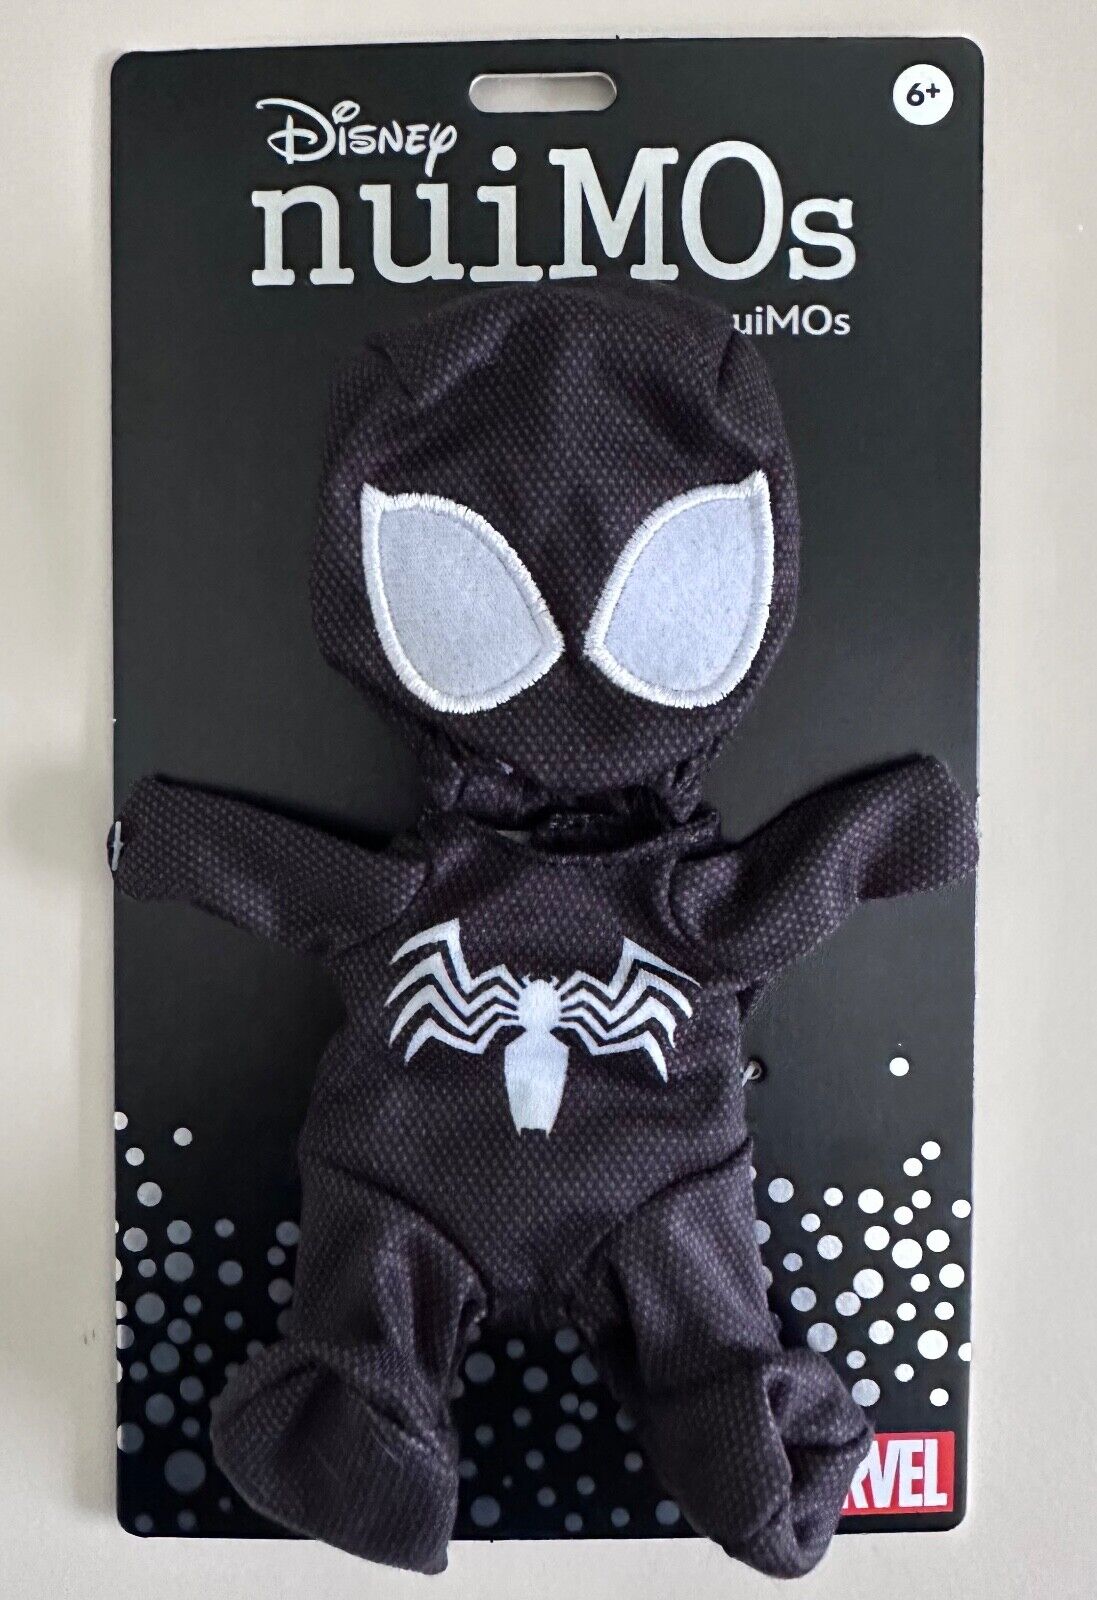 BNWT Disney nuiMOs Outfit Marvel Black Suit Symbiote Spider-Man Costume Outfit